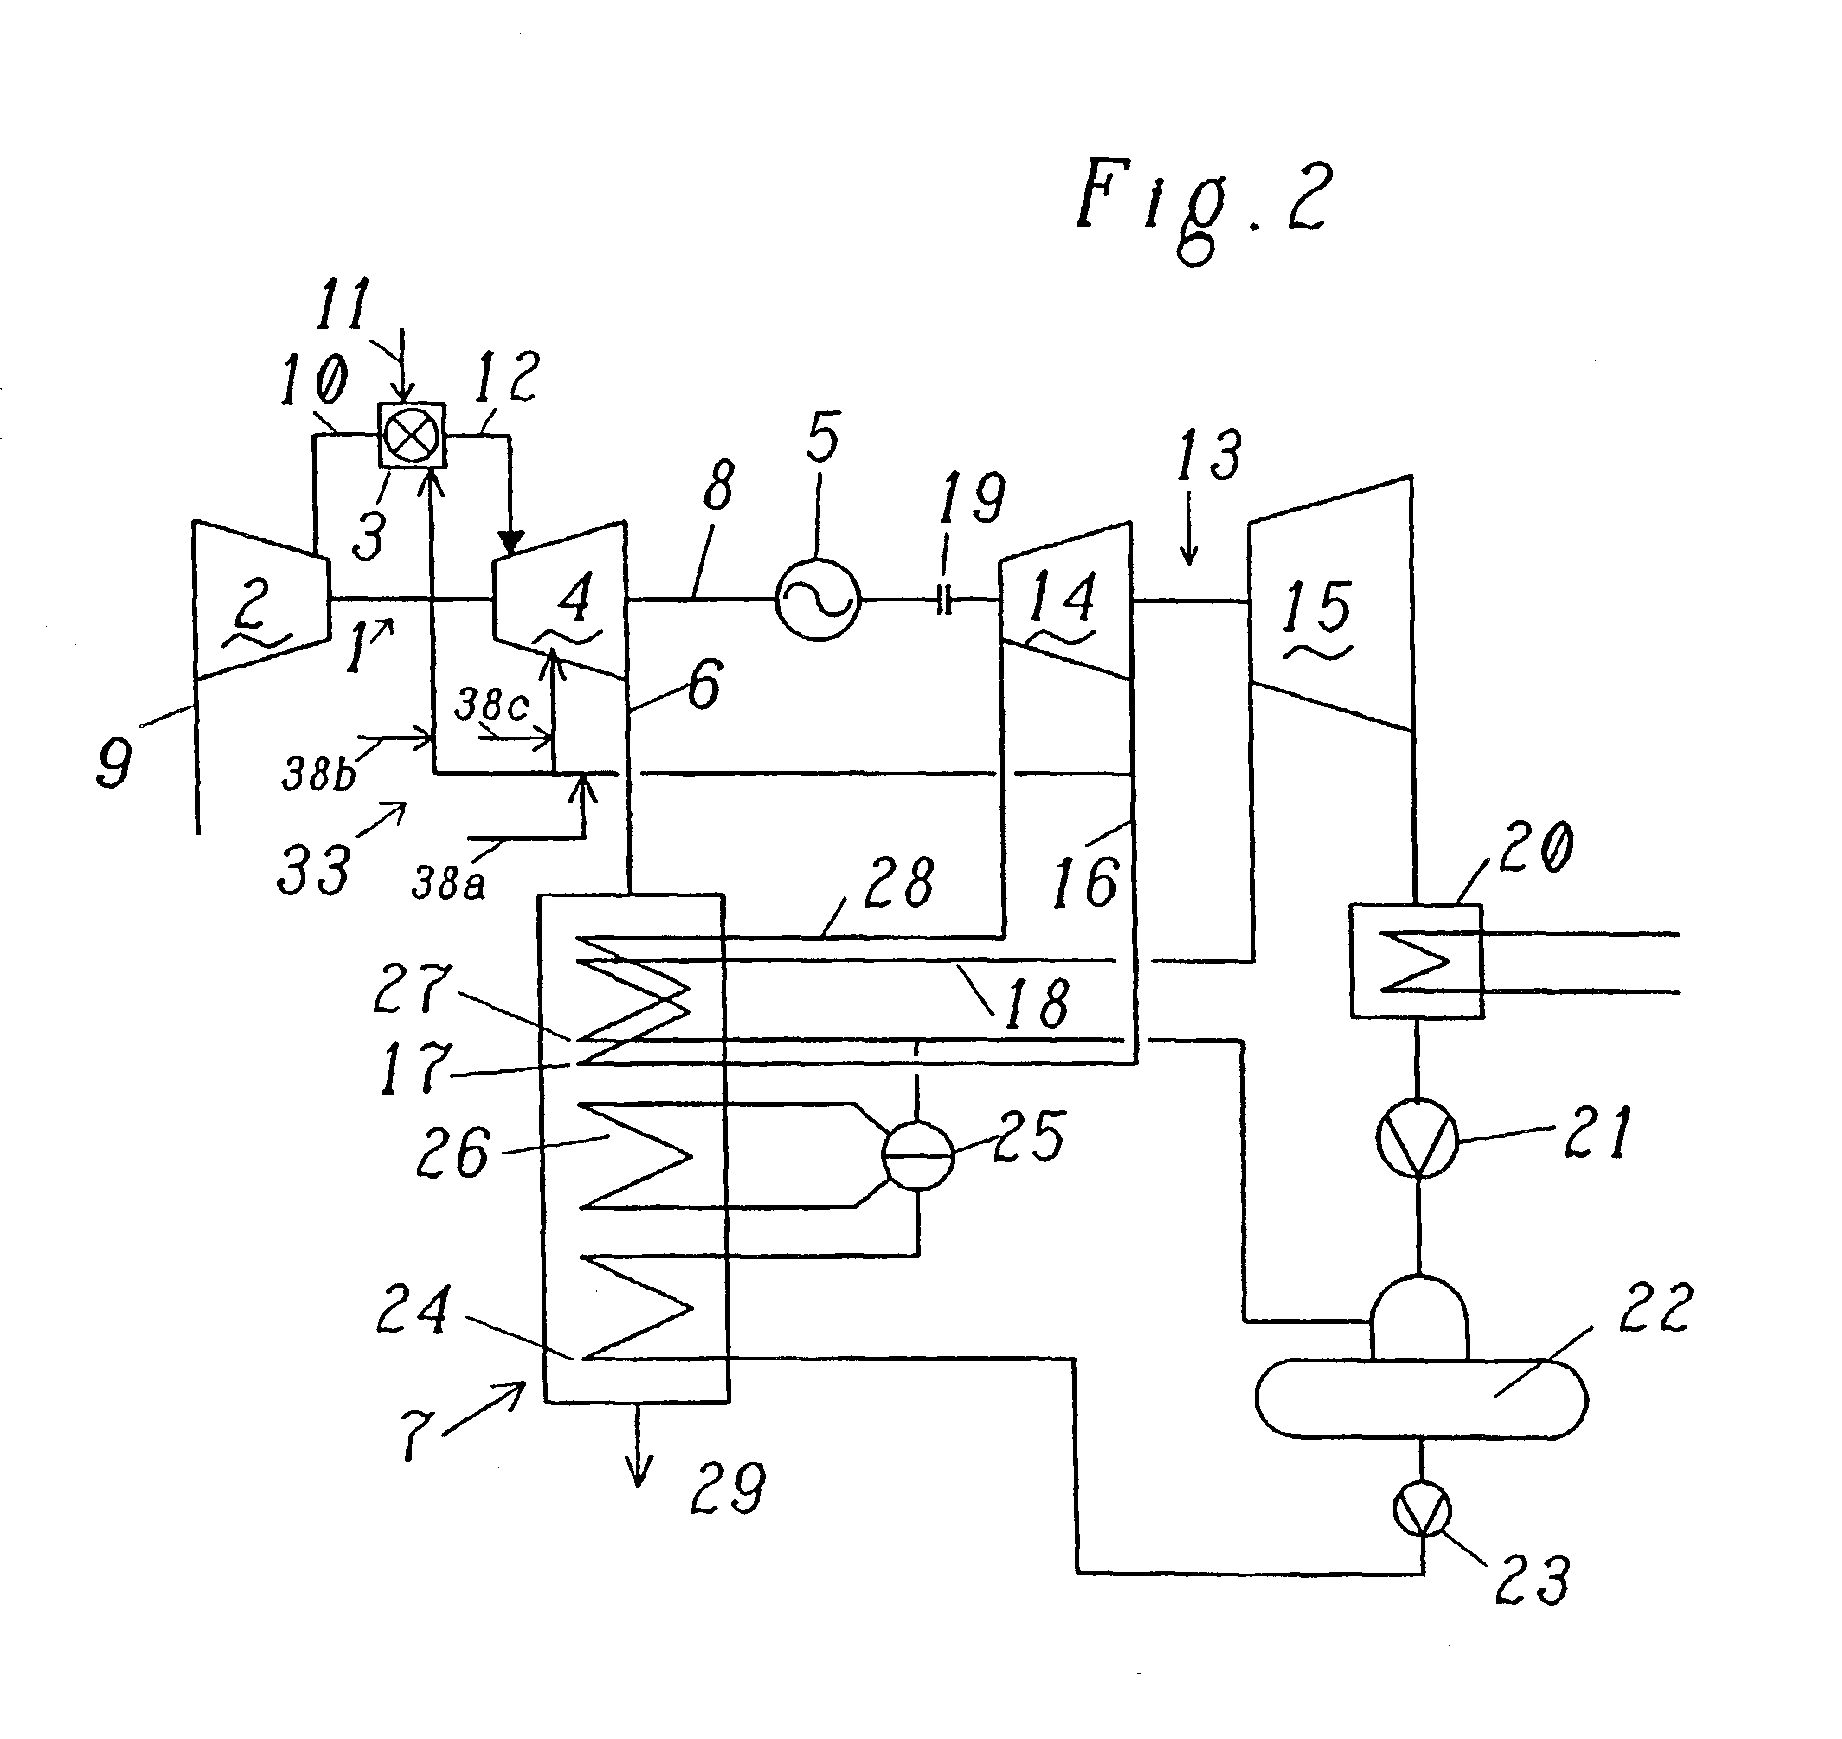 Method and device for preventing deposits in steam systems